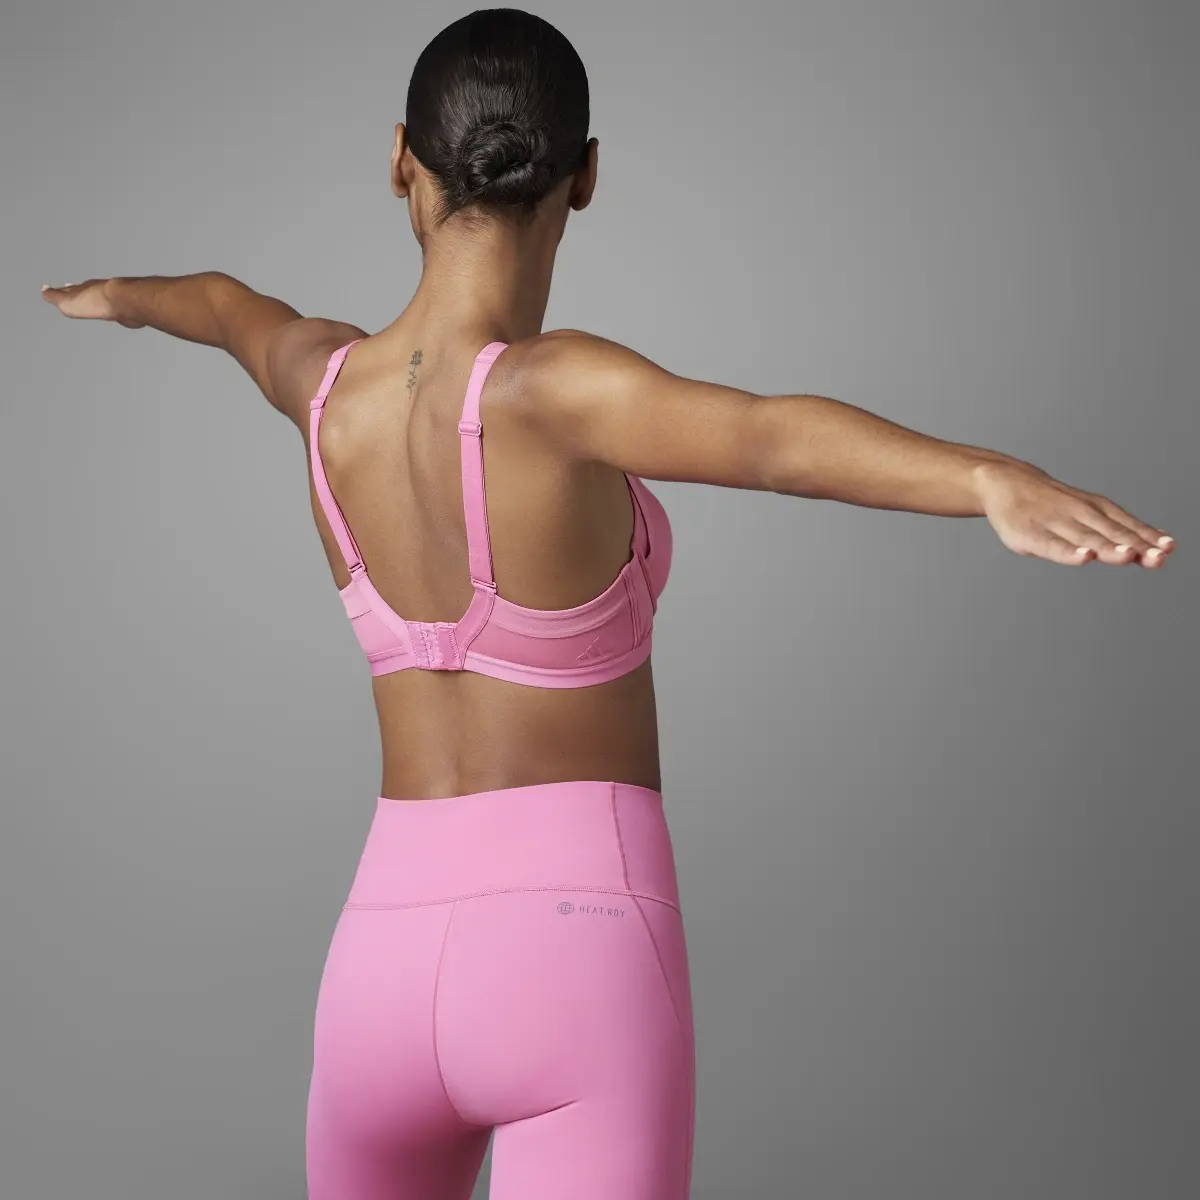 Adidas Brassière de training TLRD Impact Luxe Collective Power Maintien fort. 2